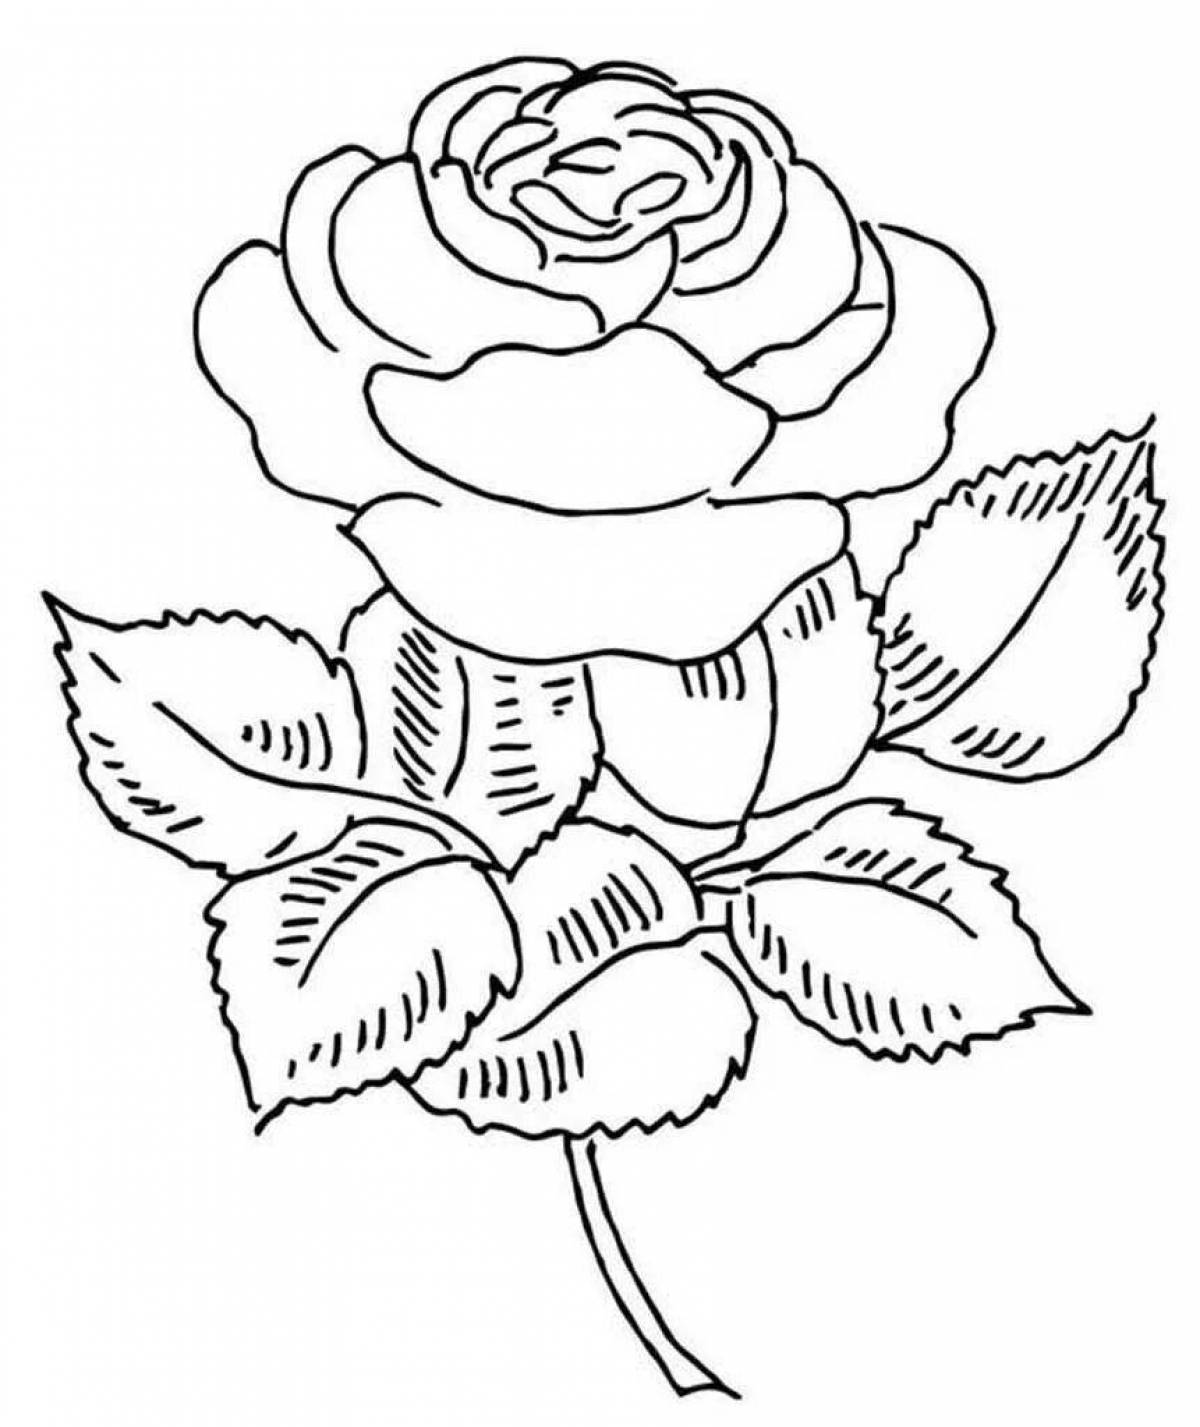 Charming rose coloring page